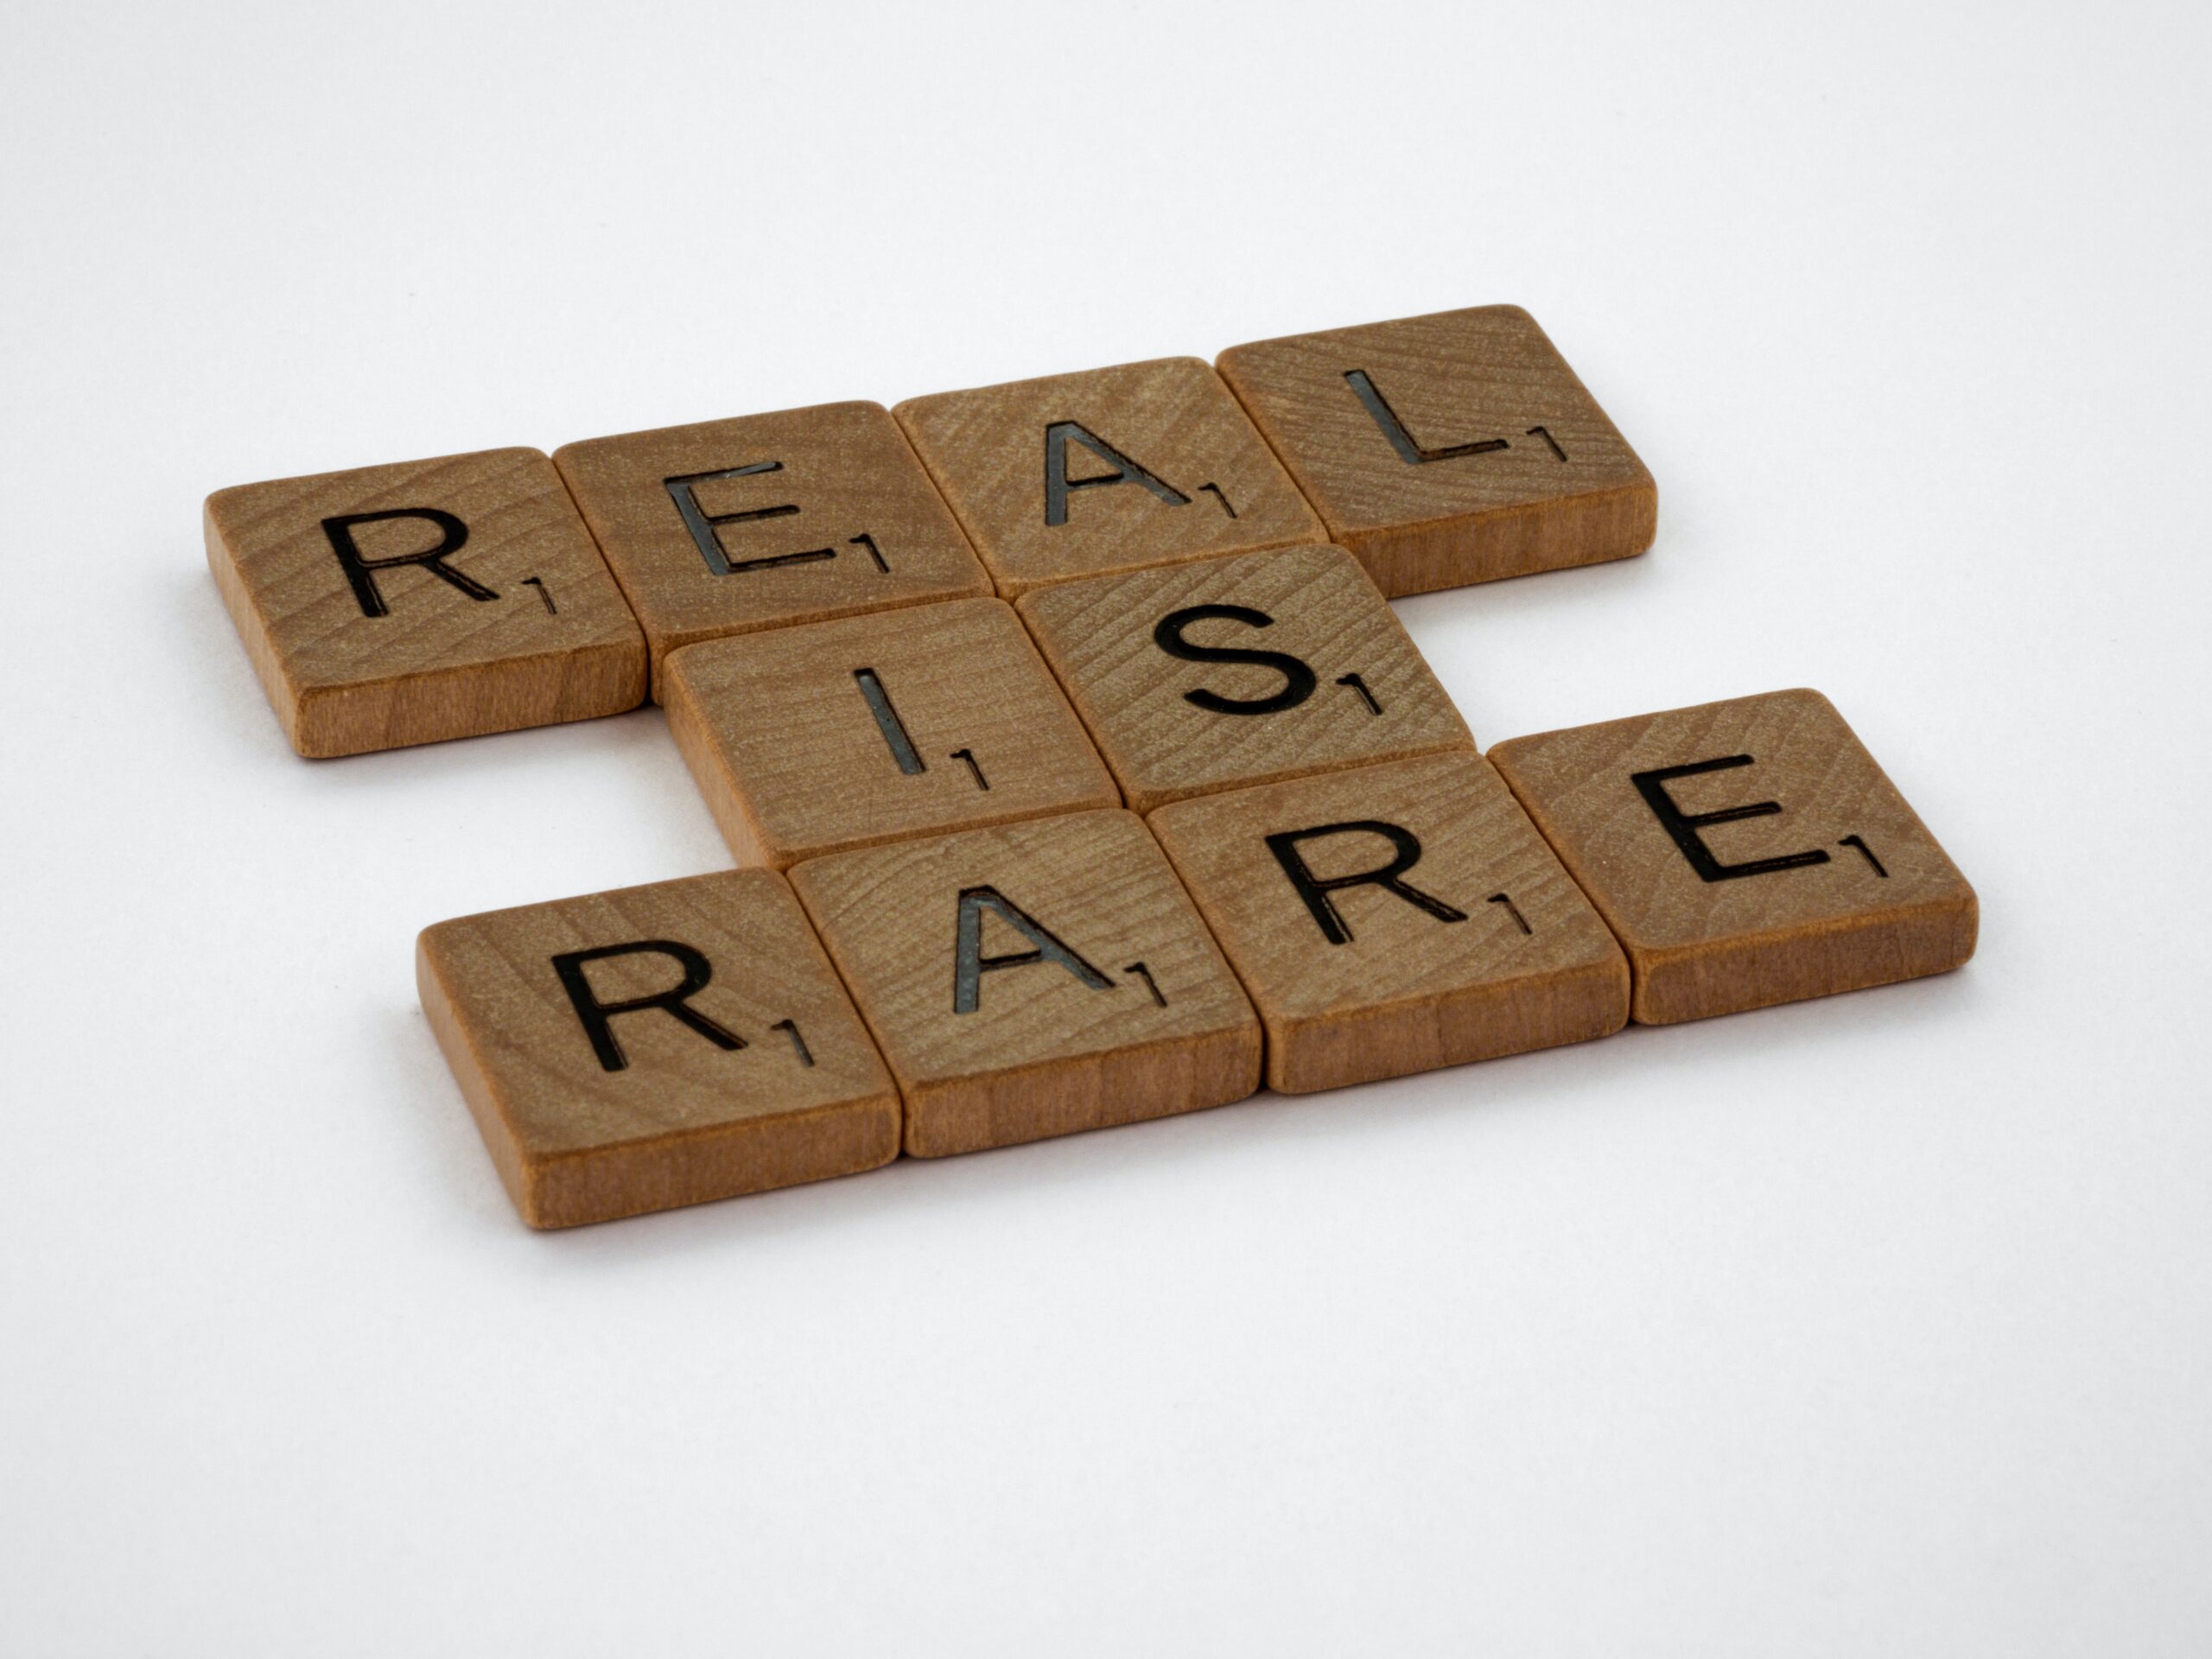 A group of tiles with letters on them. The are arranged to read "REAL IS RARE"